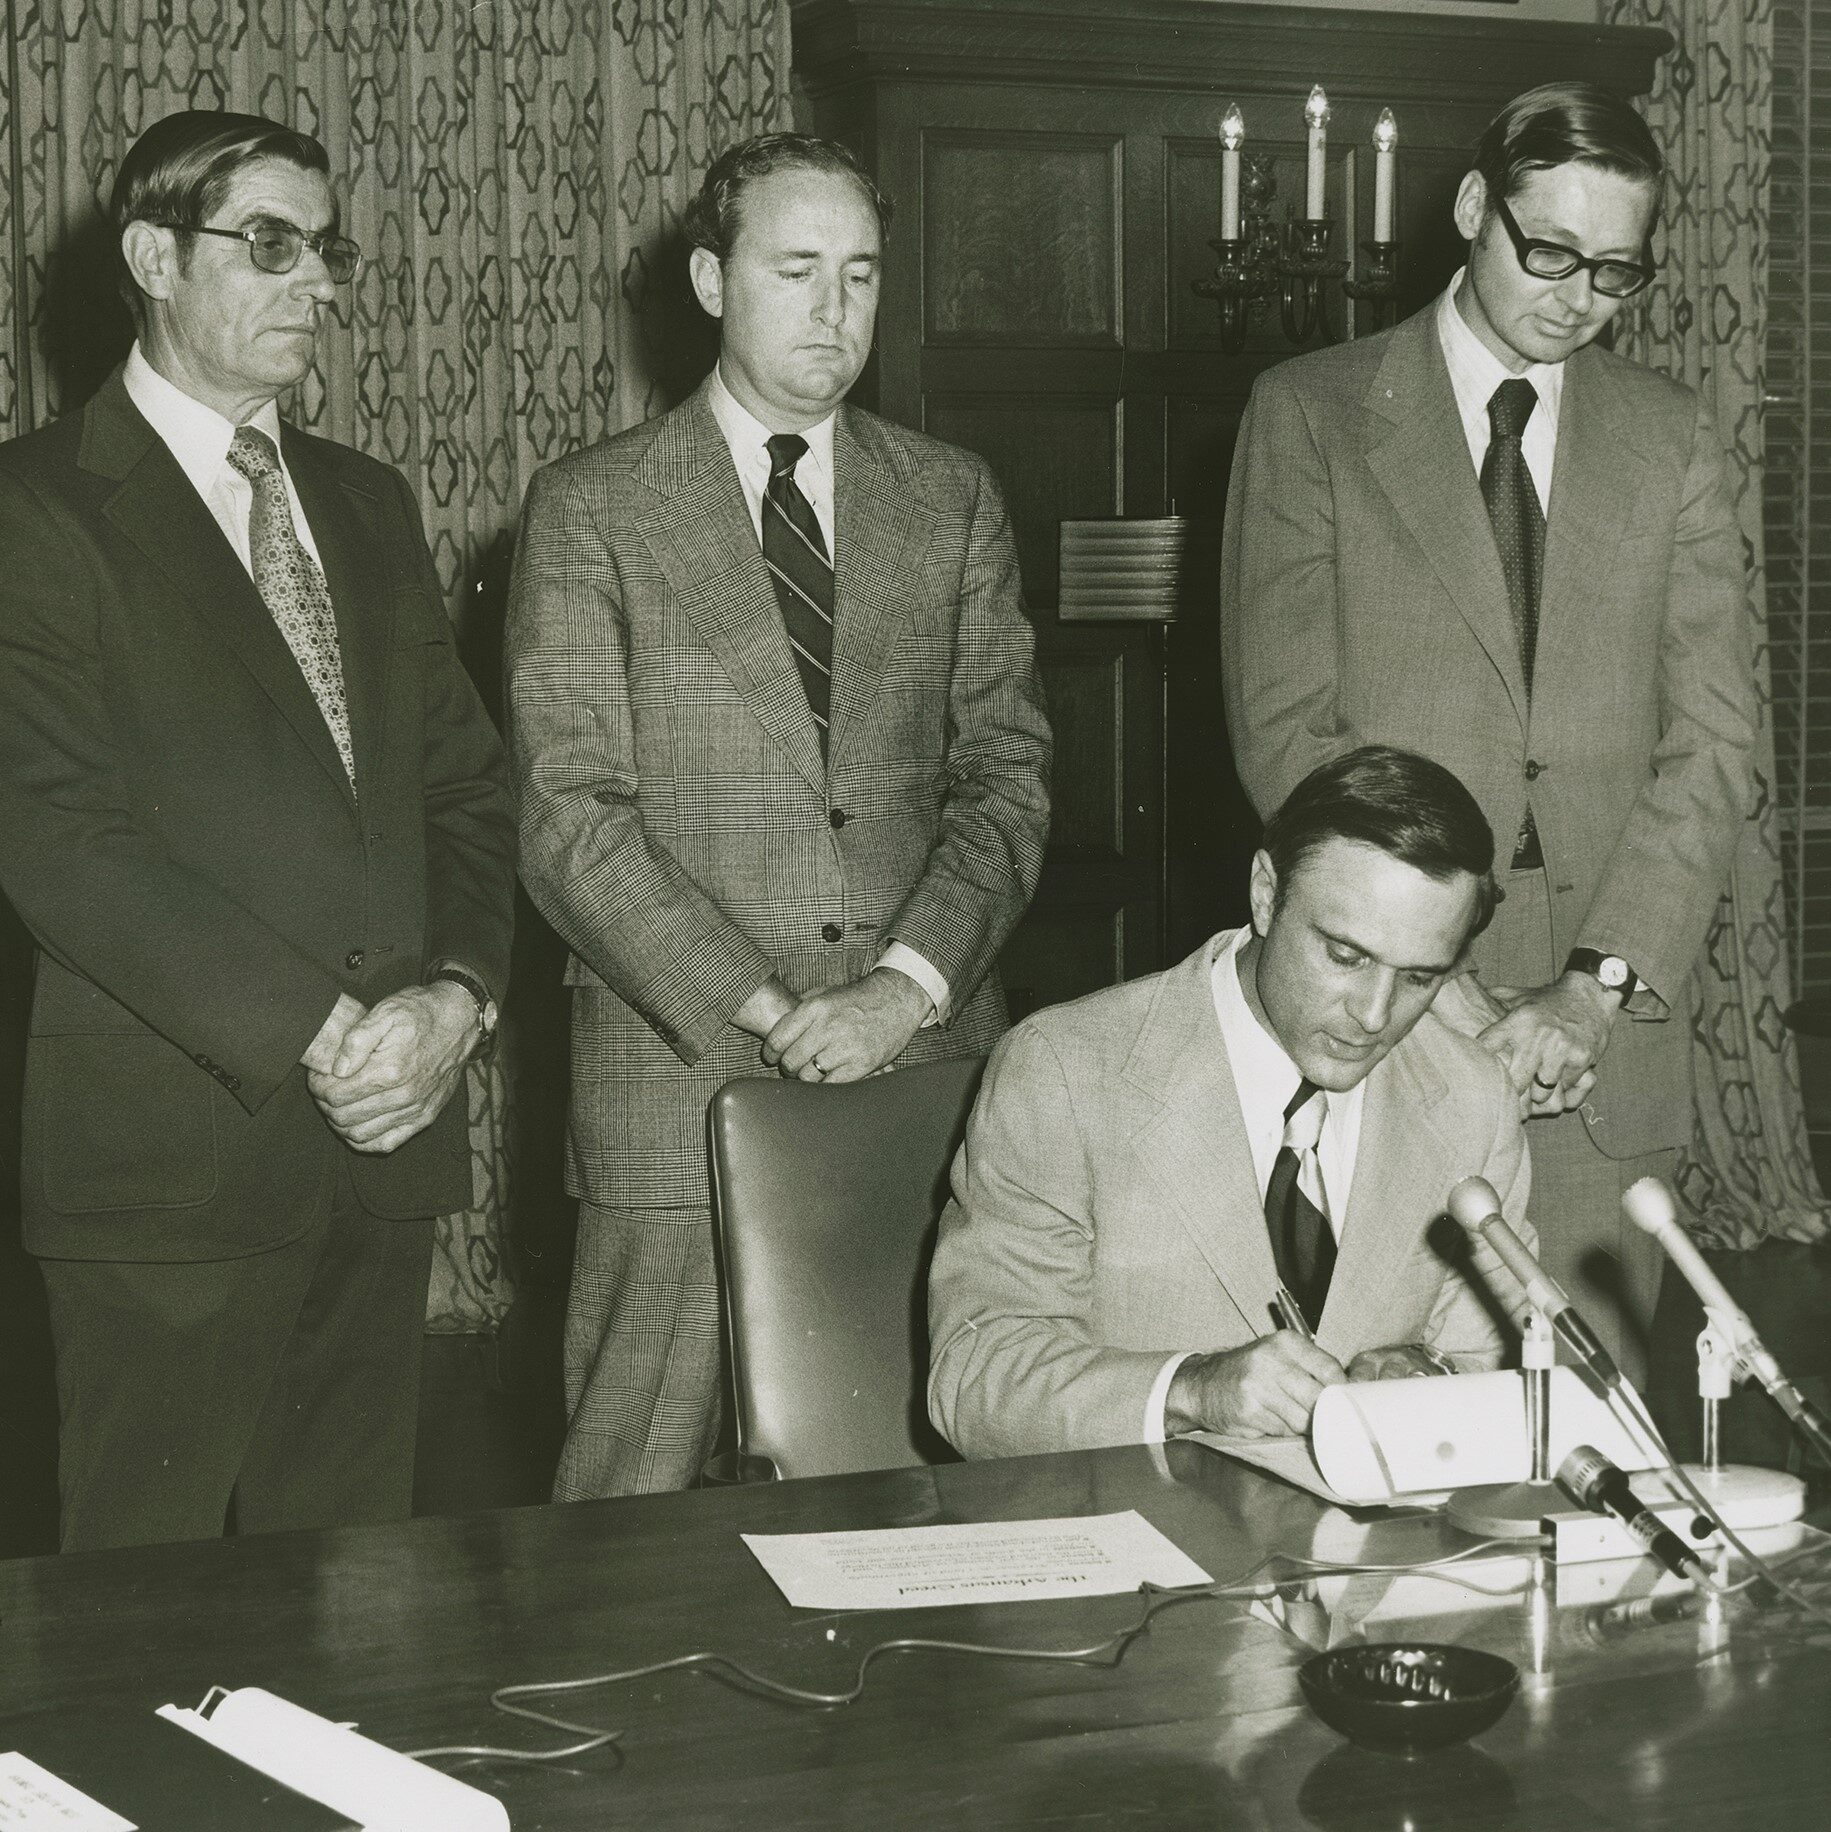 Cal Ledbetter with Charles Moore, Lacy Landers, Joe Ford, and Governor David Pryor, at the signing of the bill calling for a constitutional convention